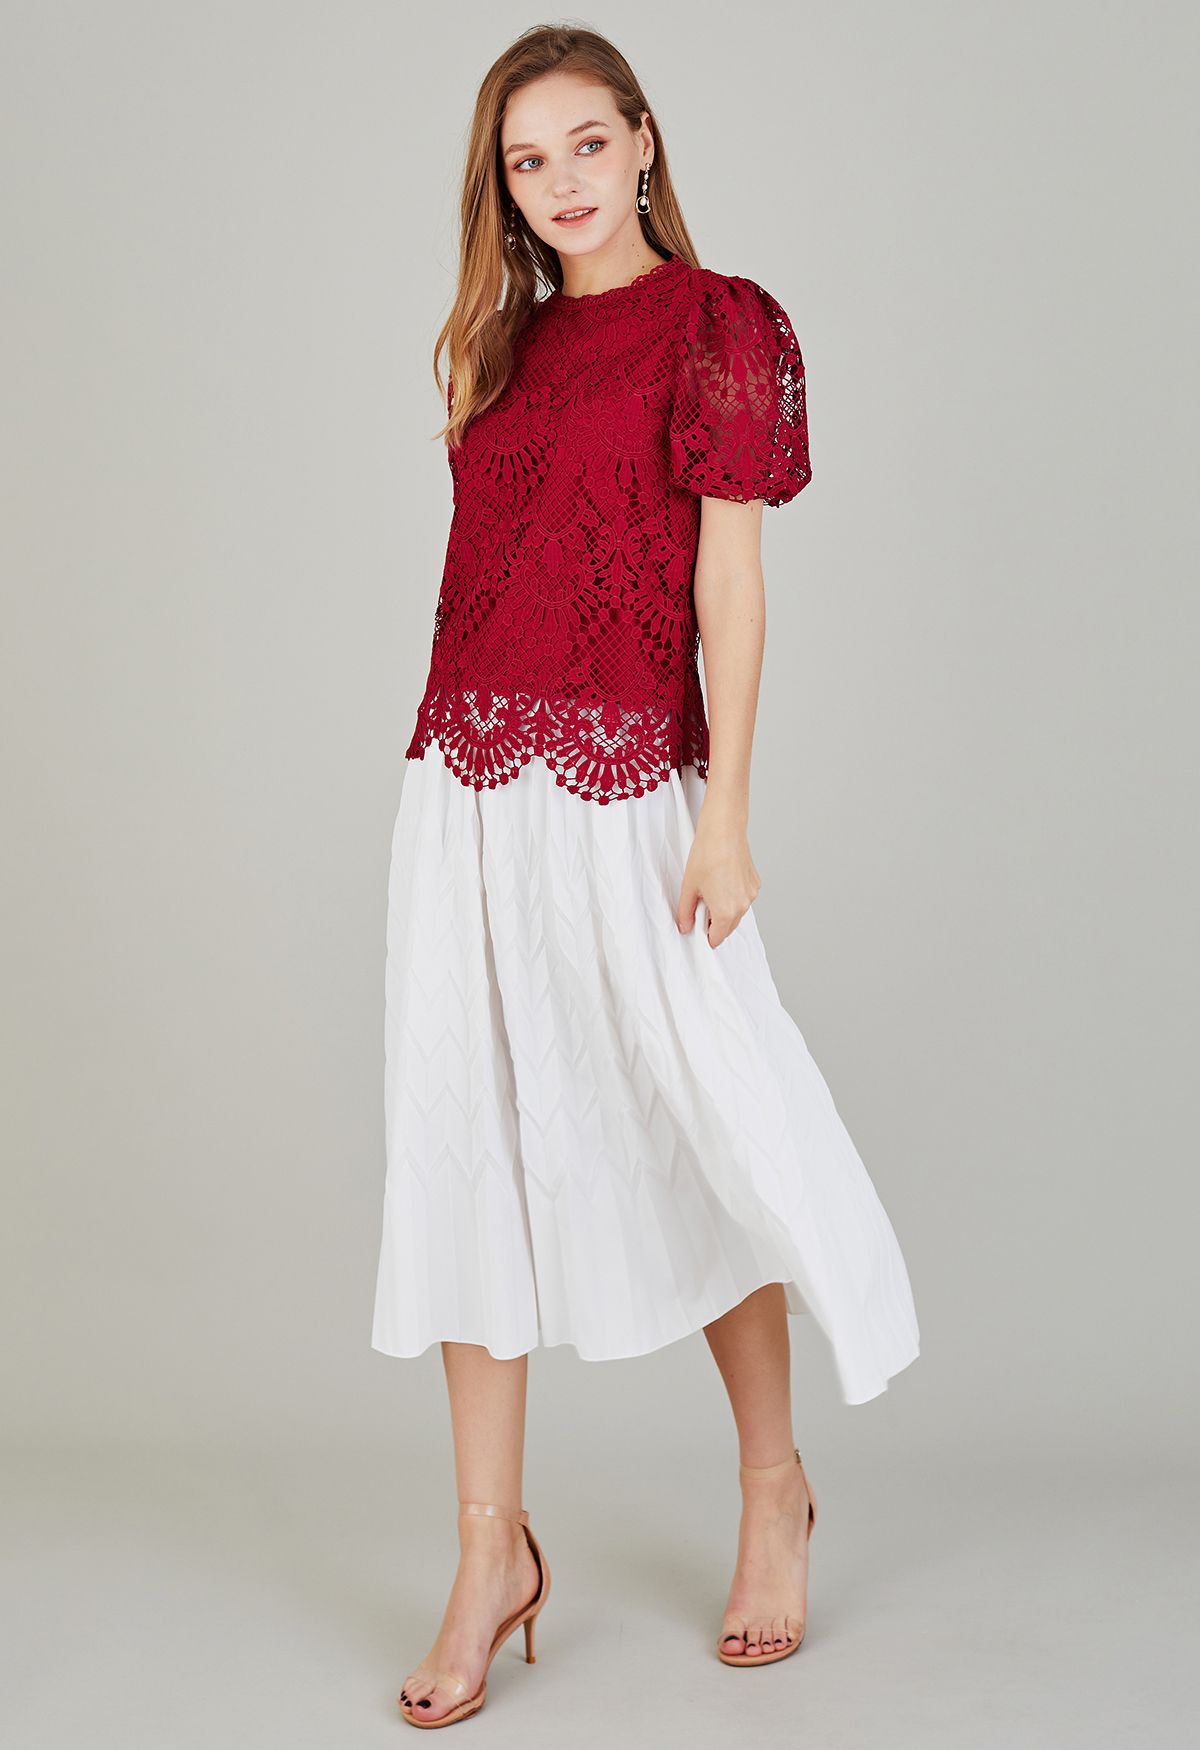 Scallop Edge Bubble Sleeve Crochet Top in Red